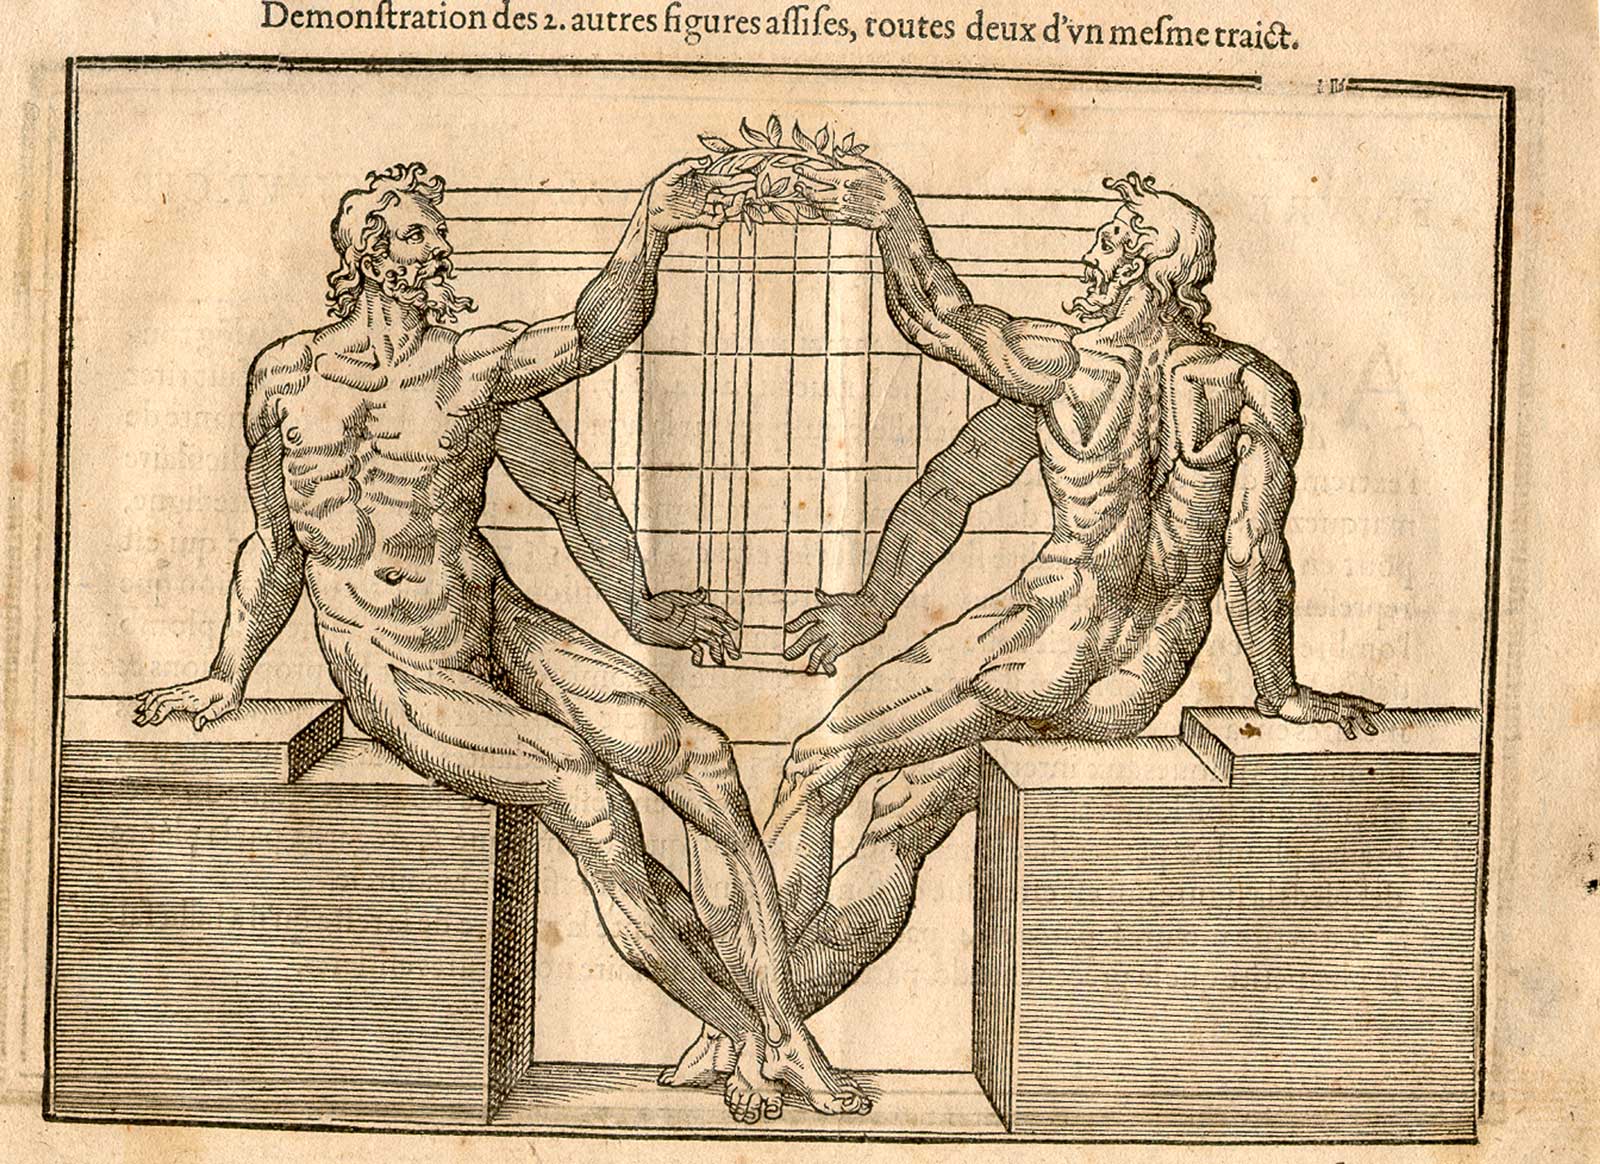 Woodcut illustration of two nude male anatomical figures reclining on large pediments, viewed from front and back, both images in identical poses facing each other with left hands uplifted with hands open, both images showing the proportions of the figure measured out, from Jehan Cousin’s Livre de pourtraiture, NLM Call no.: WZ 250 C8673L 1608.